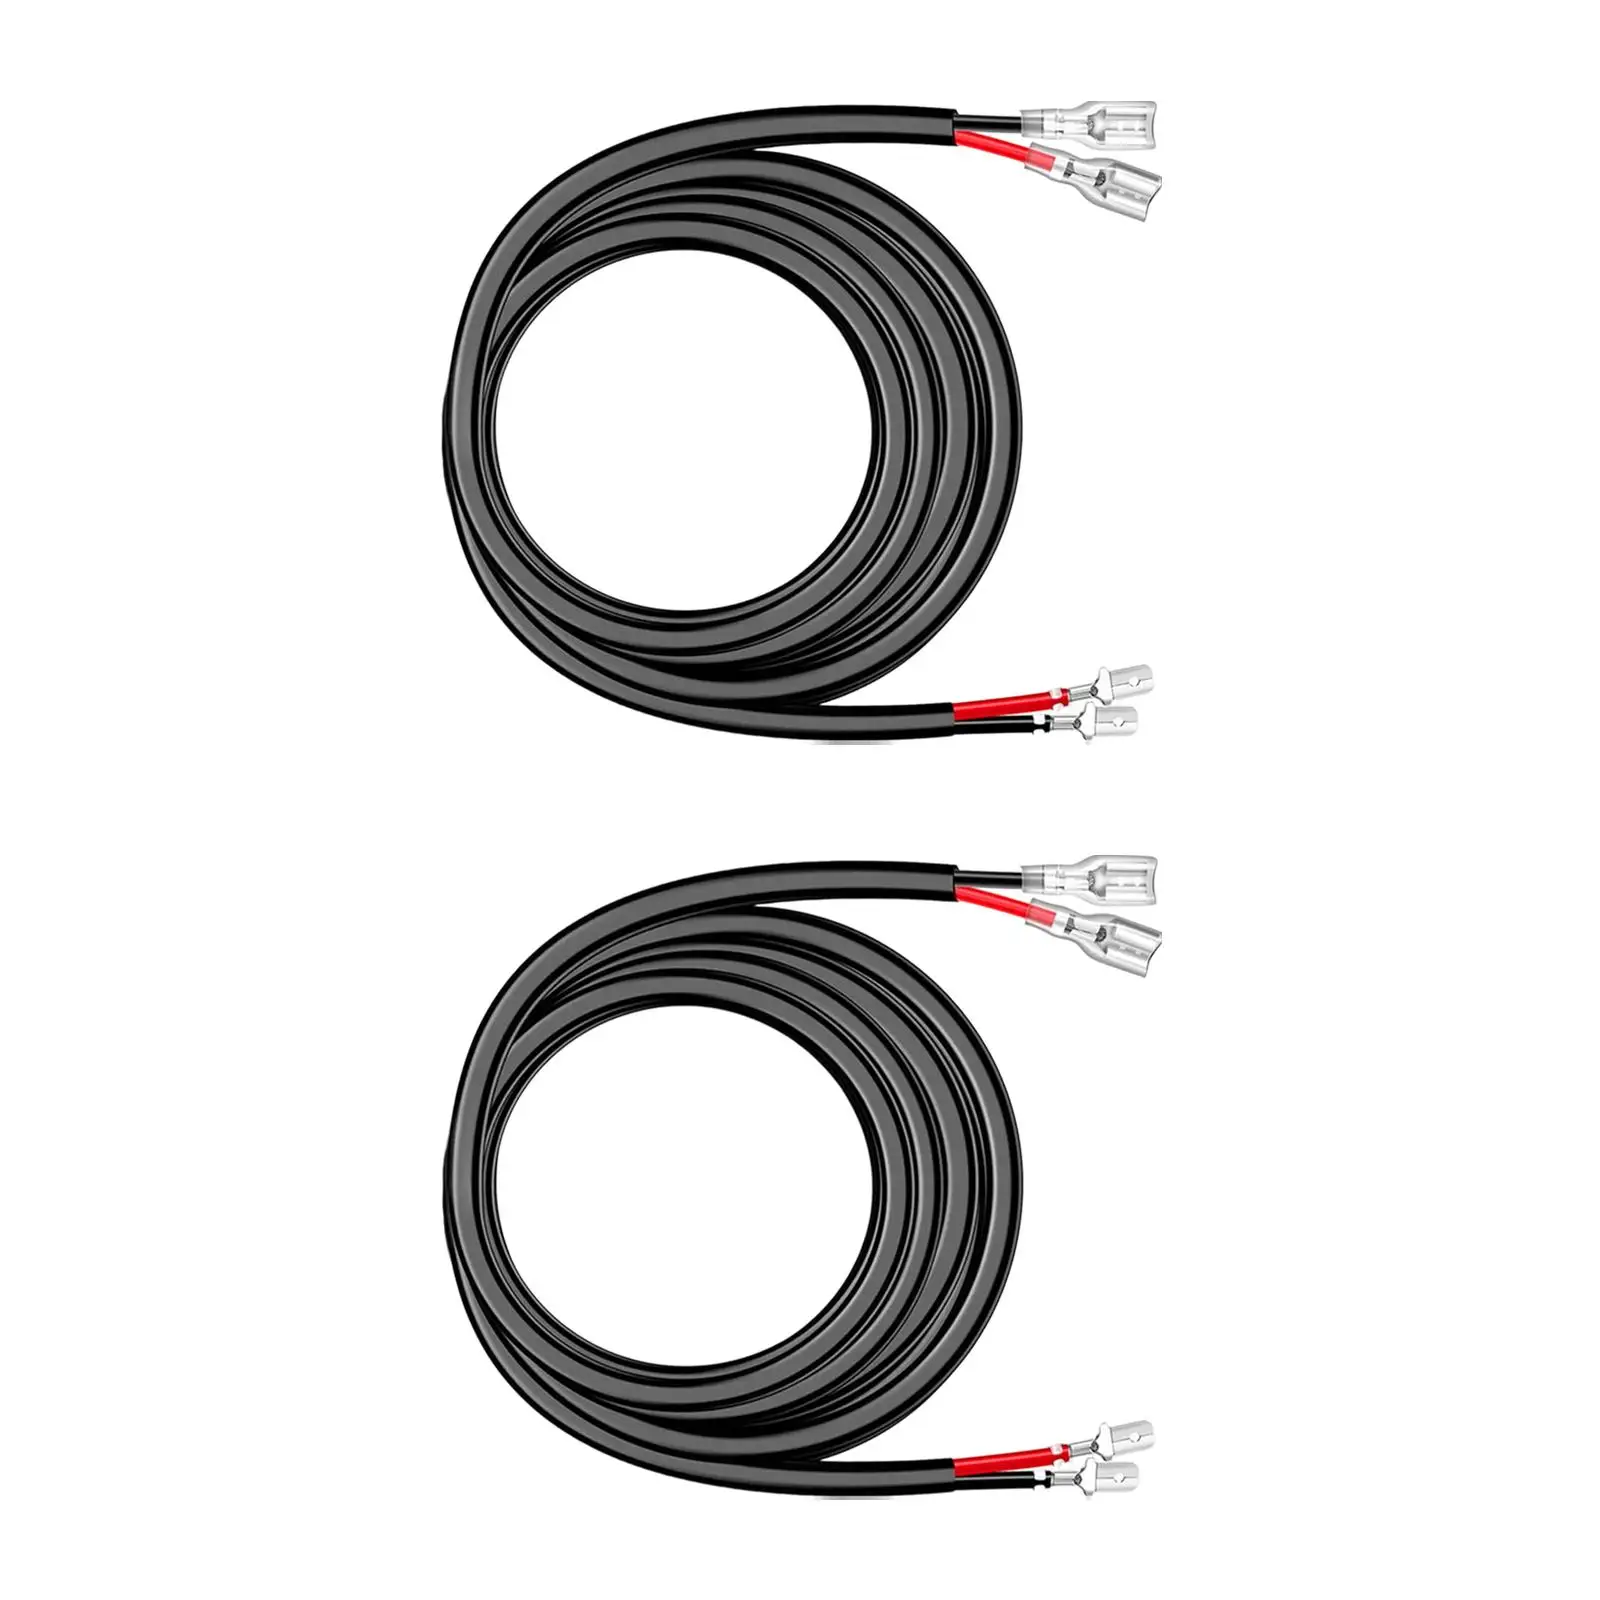 2x 16AWG Extension Wiring Harness High Performance for Yachts Lights Replaces